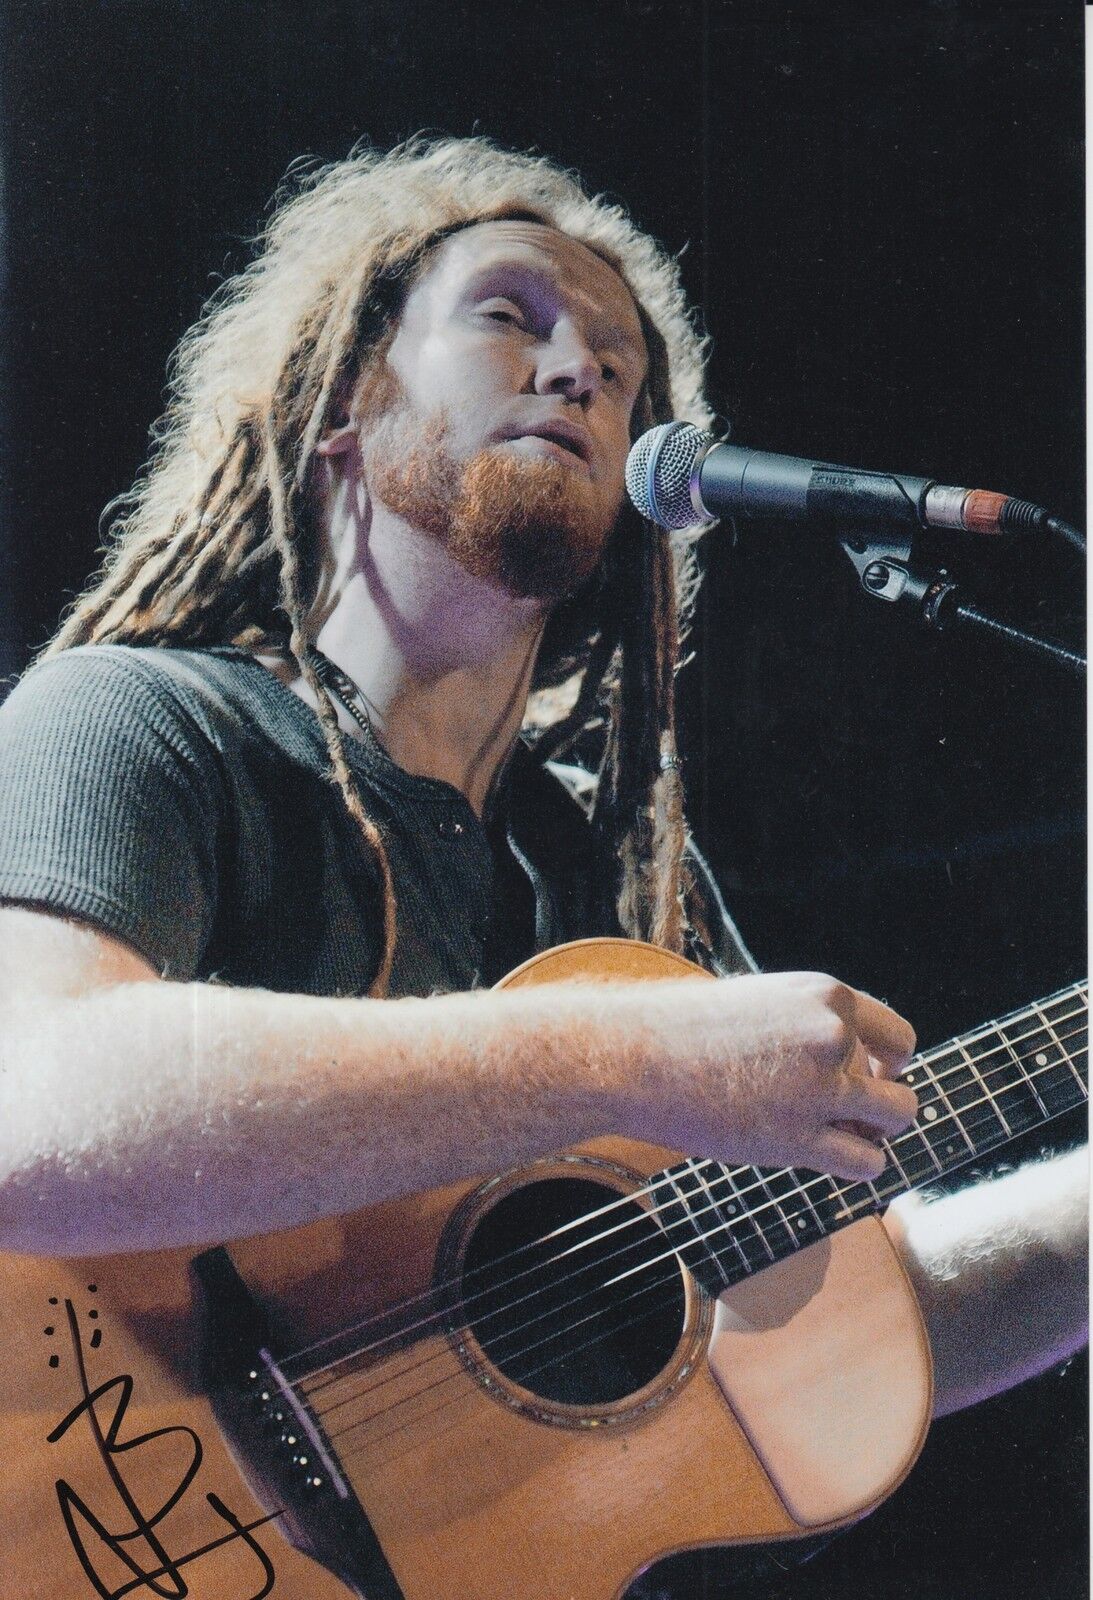 Newton Faulkner Hand Signed 12x8 Photo Poster painting.